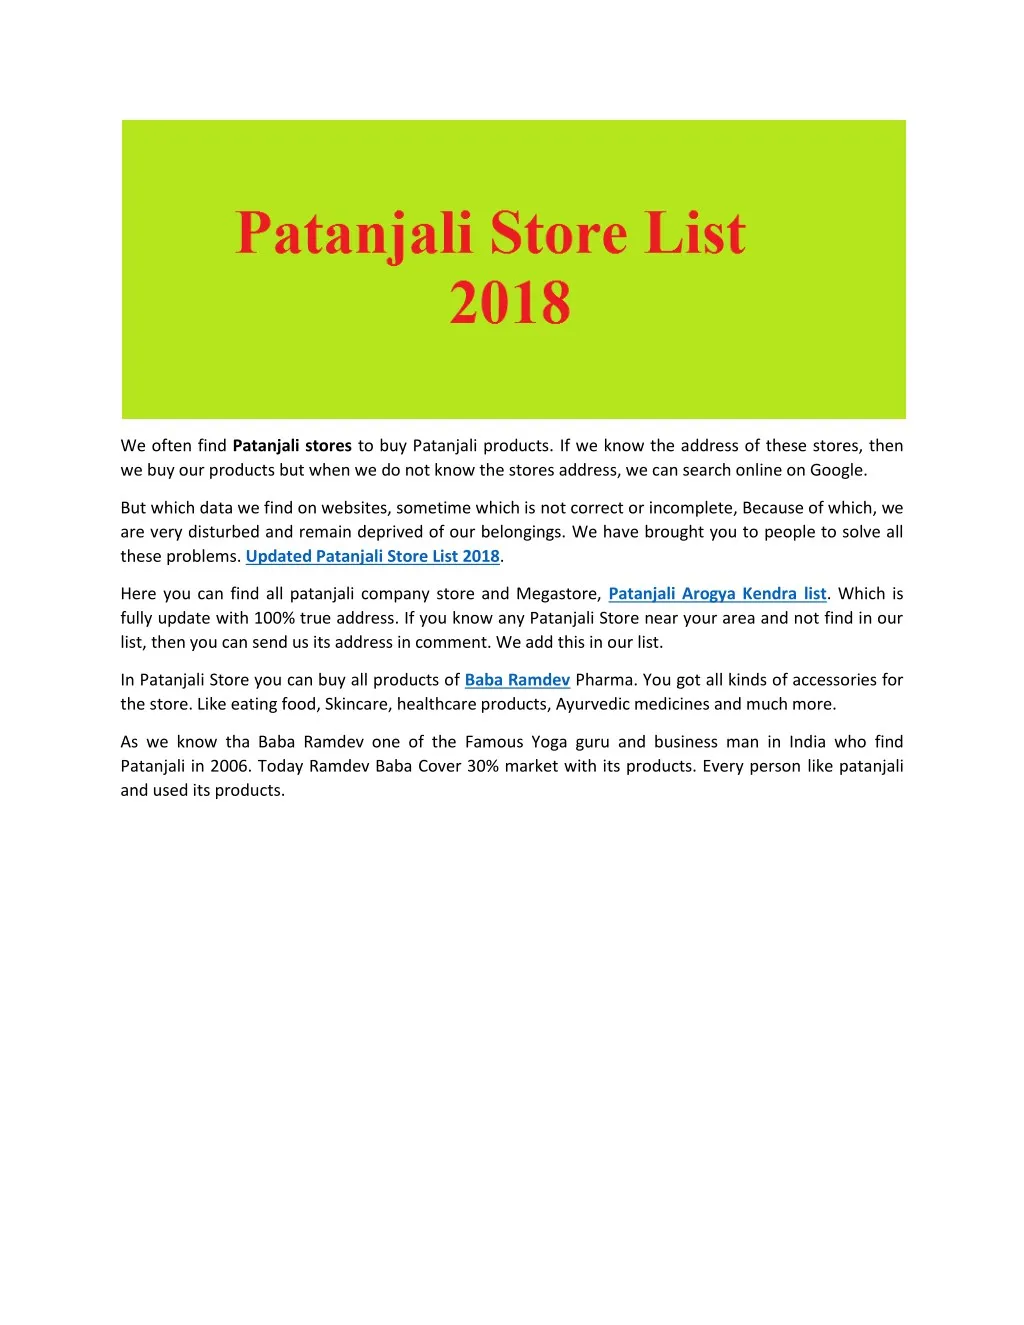 we often find patanjali stores to buy patanjali